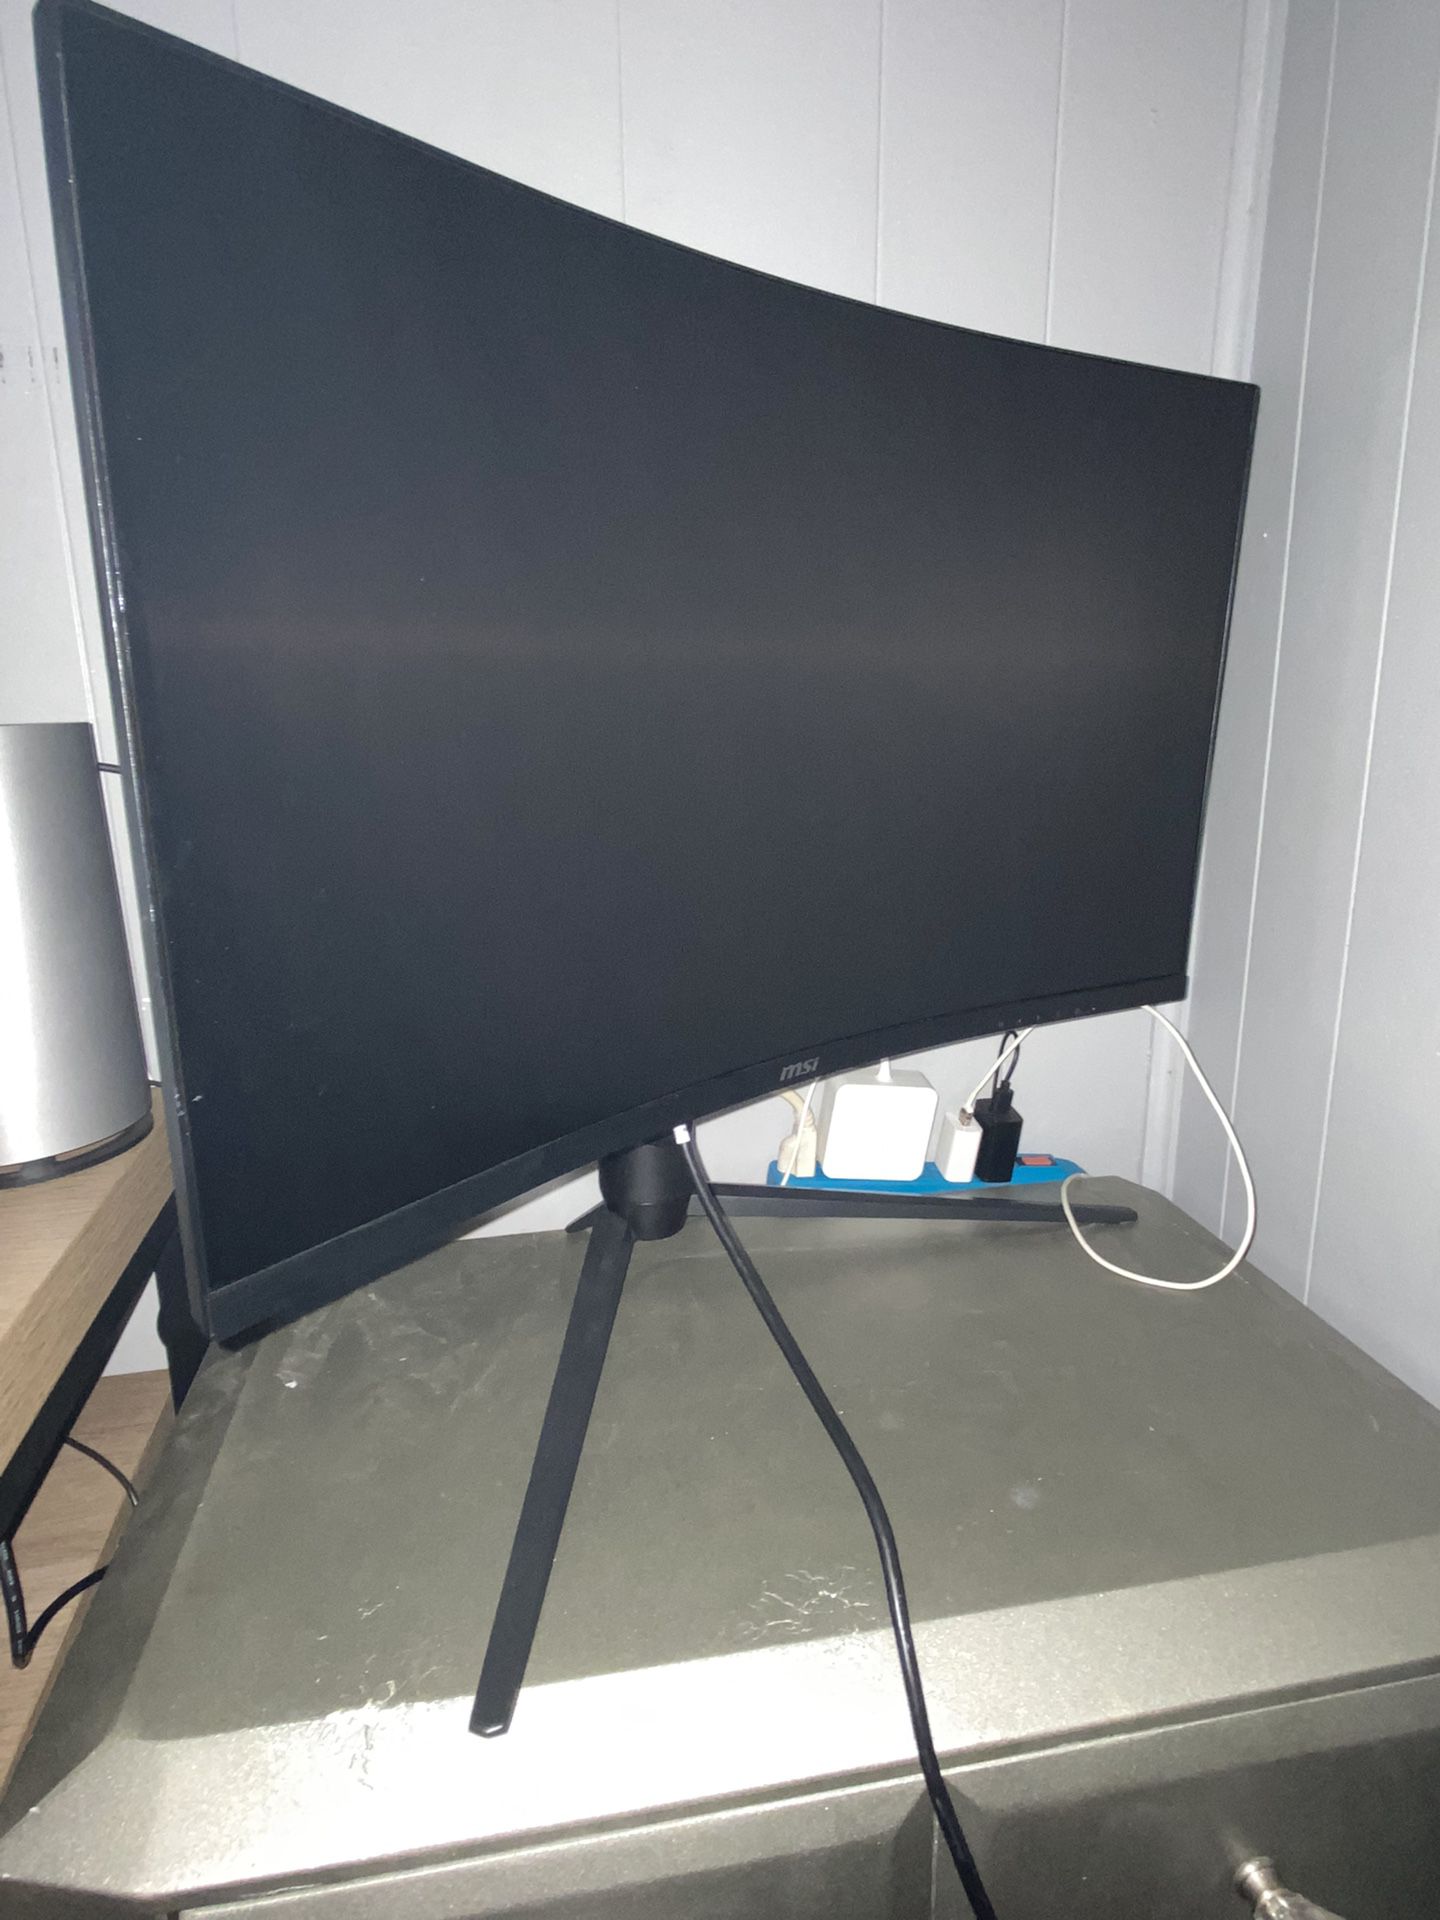 Msi curved Monitor 27” 120 hz